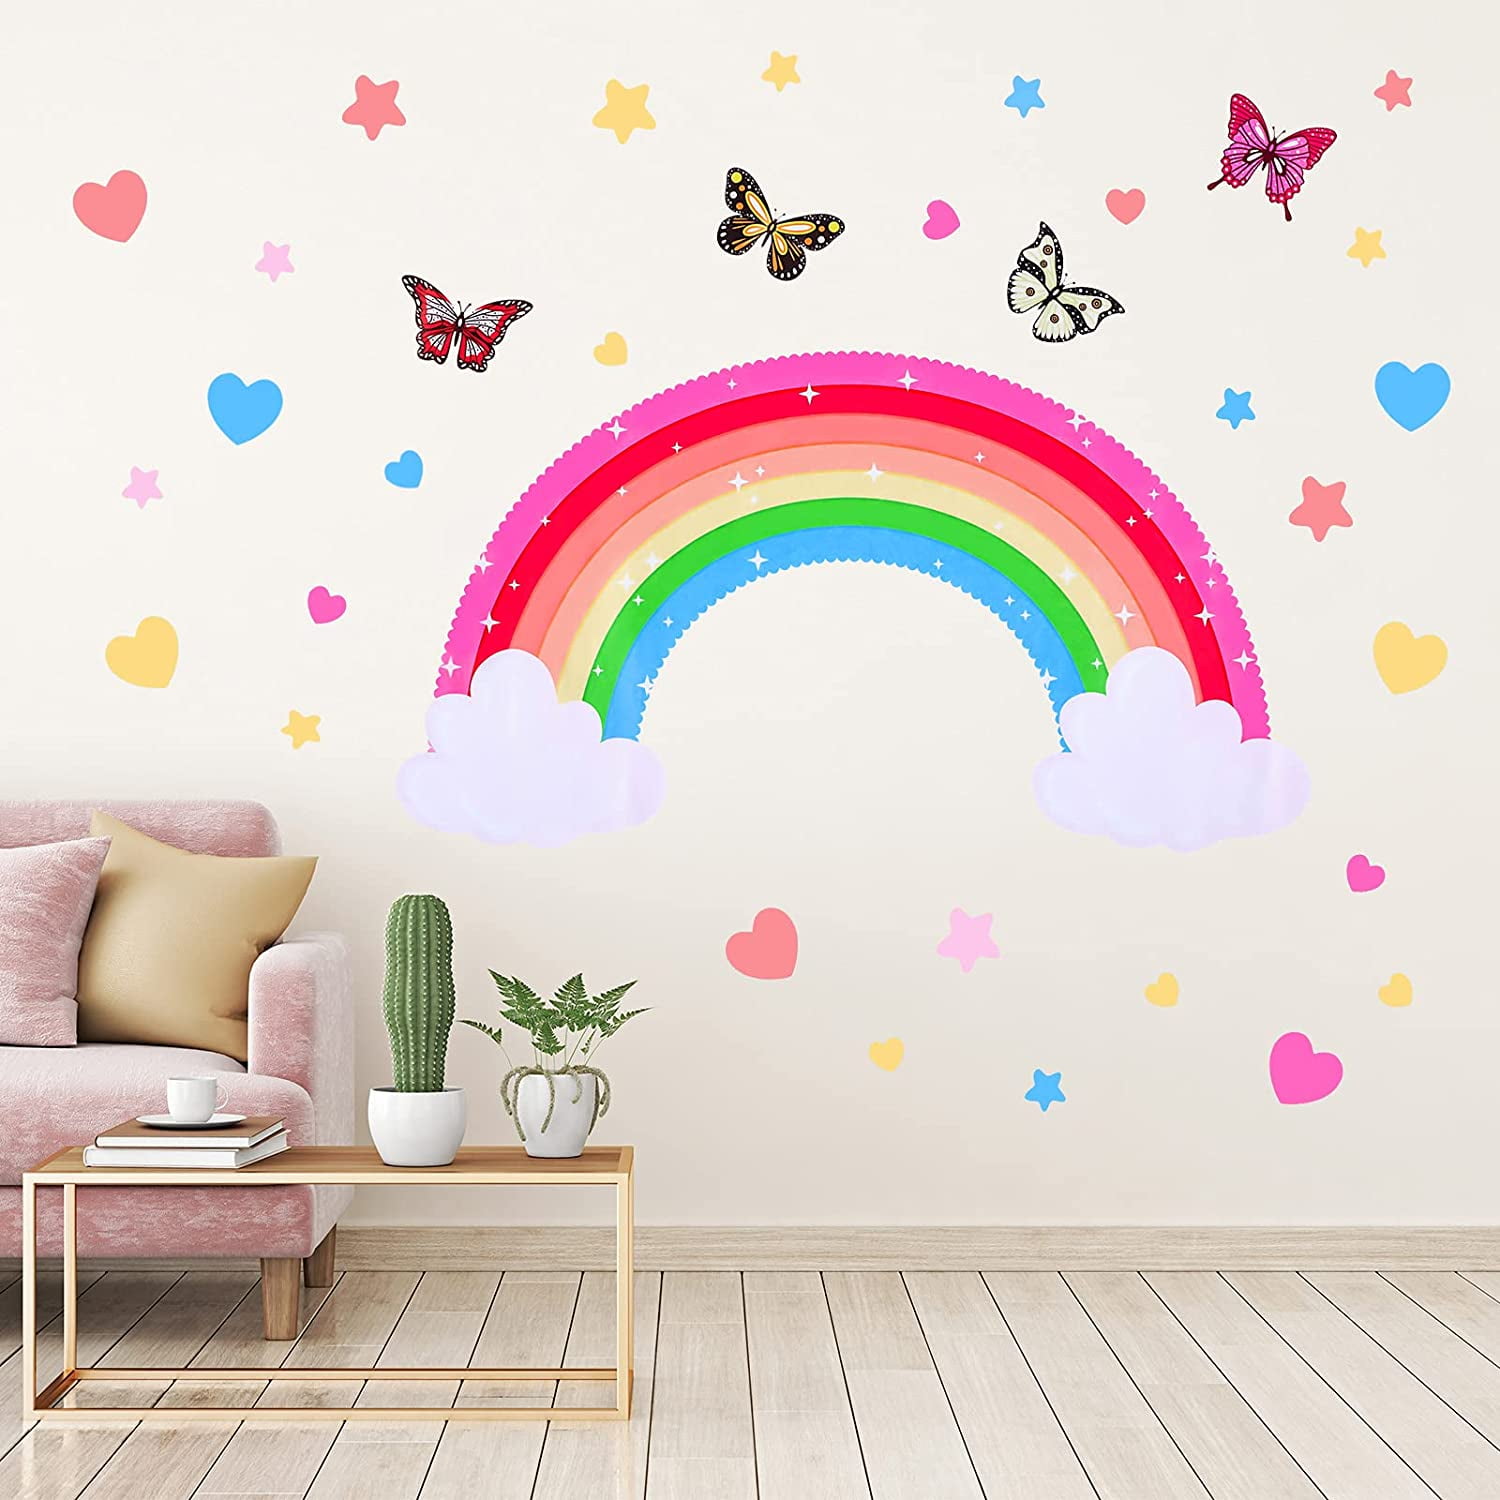 Rainbow Wall Sticker Removable Star Butterfly Heart-shaped Wall ...